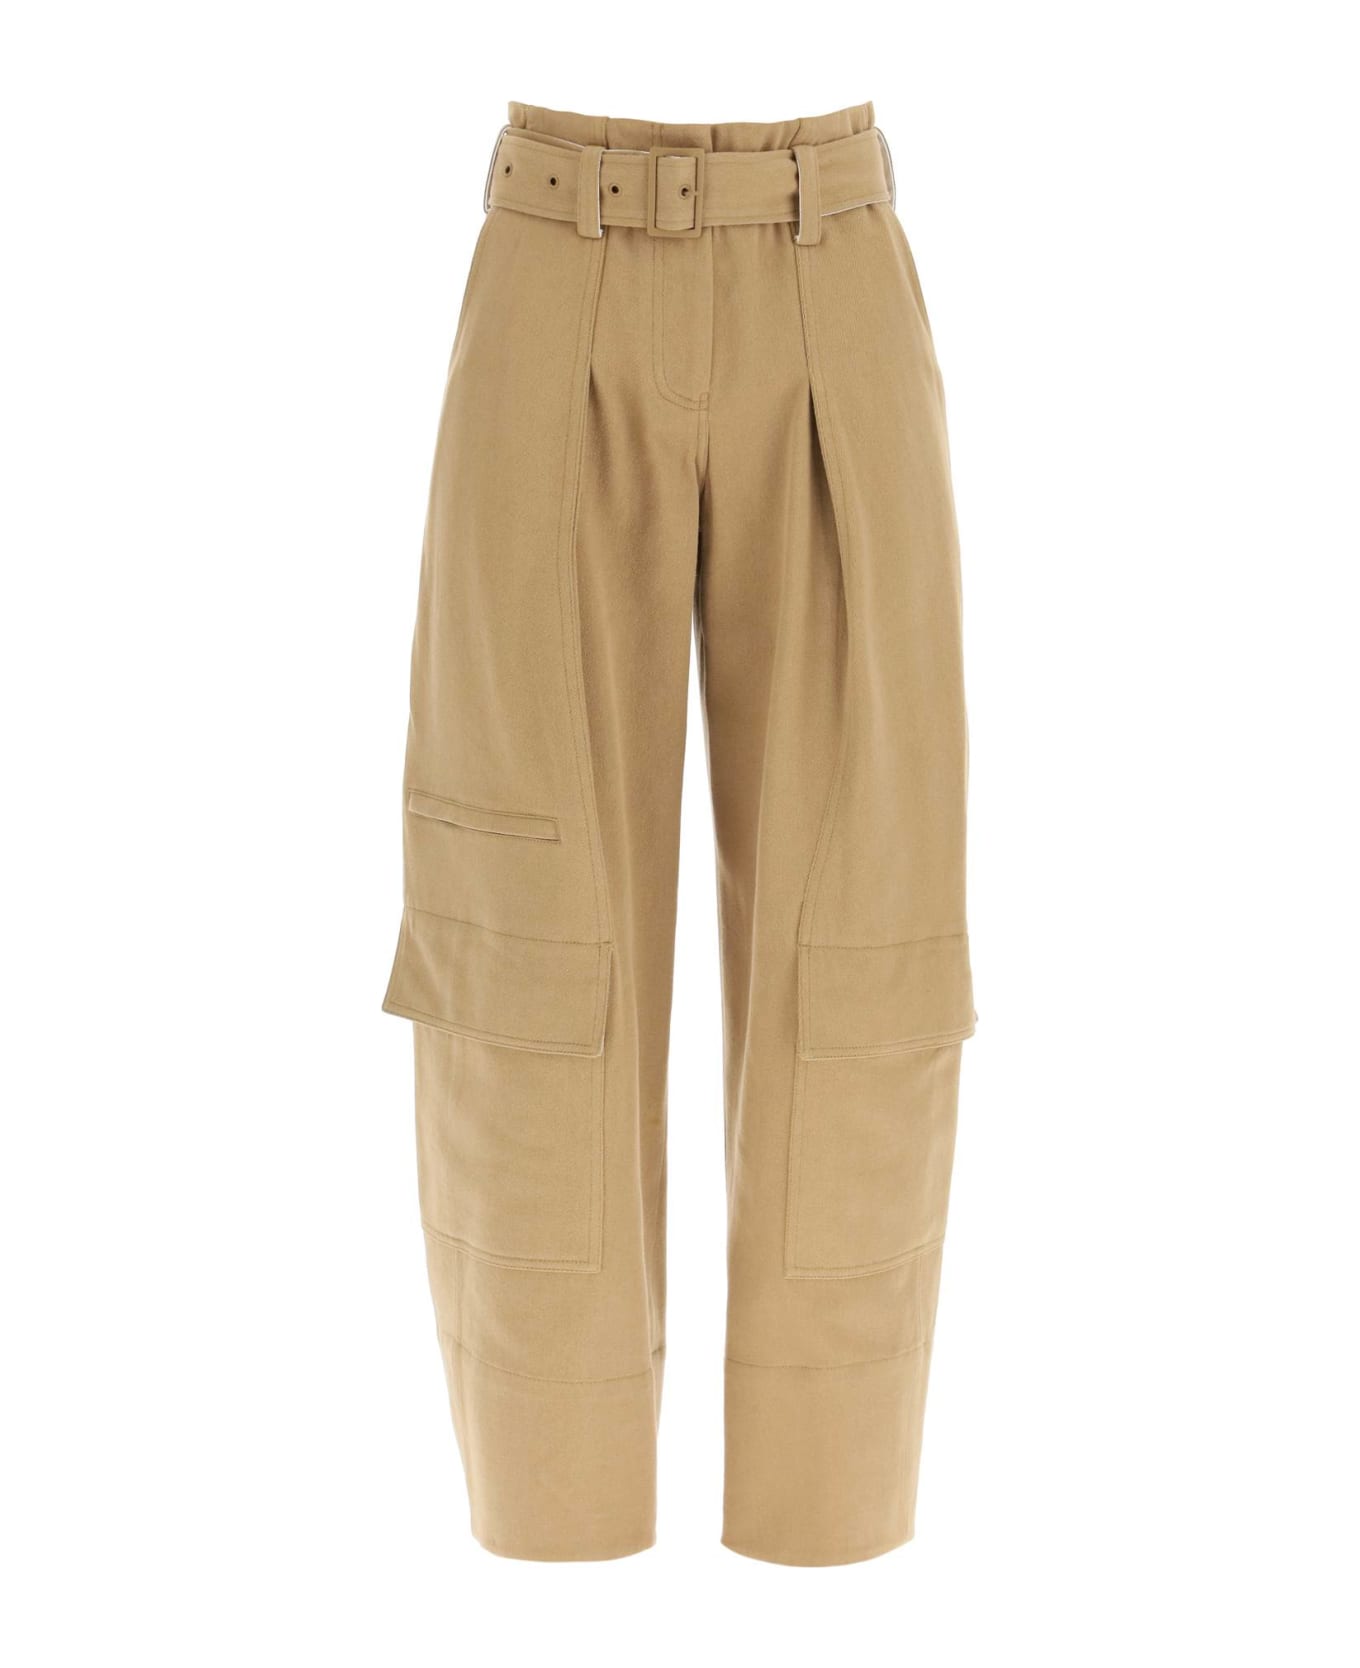 Low Classic Cargo Pants With Matching Belt - BEIGE (Beige) ボトムス